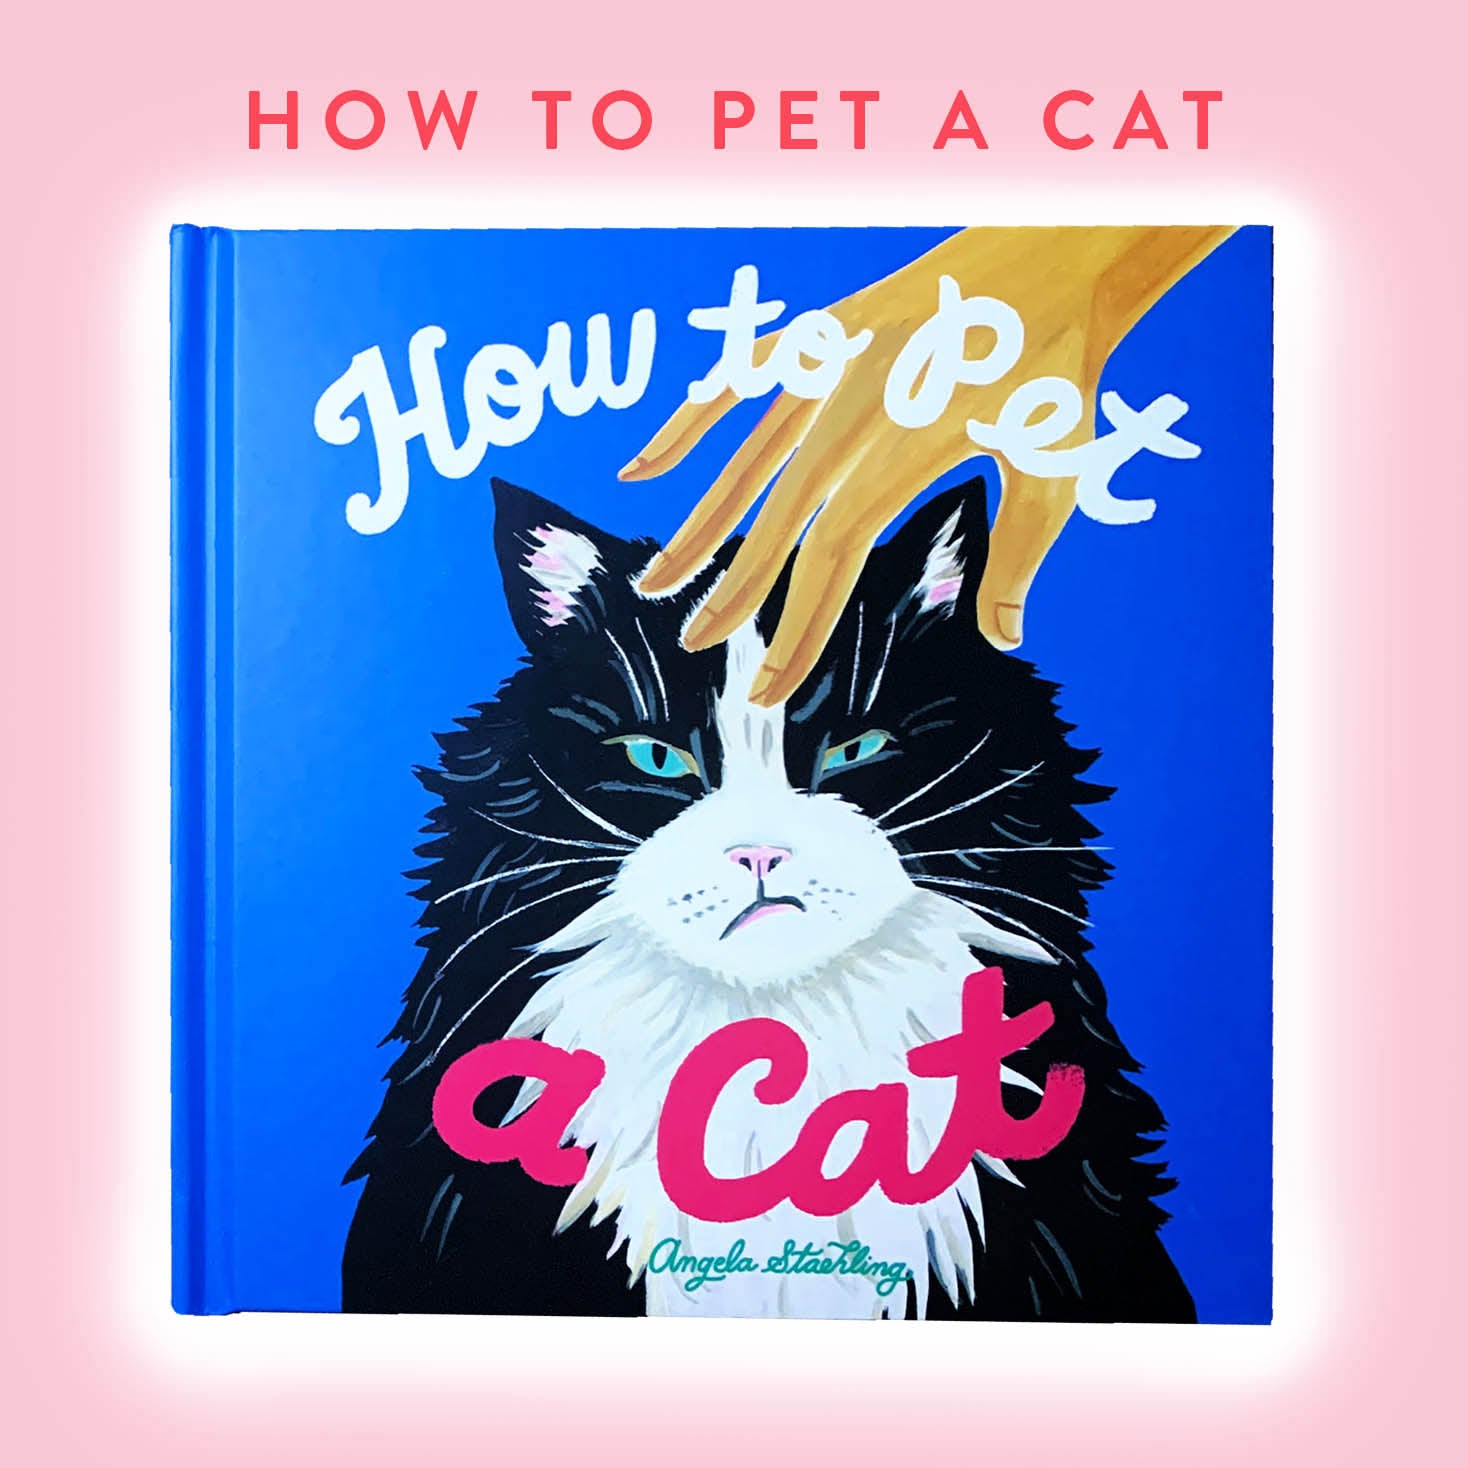 How to Pet a Cat book written and illustrated by Angela Staehling